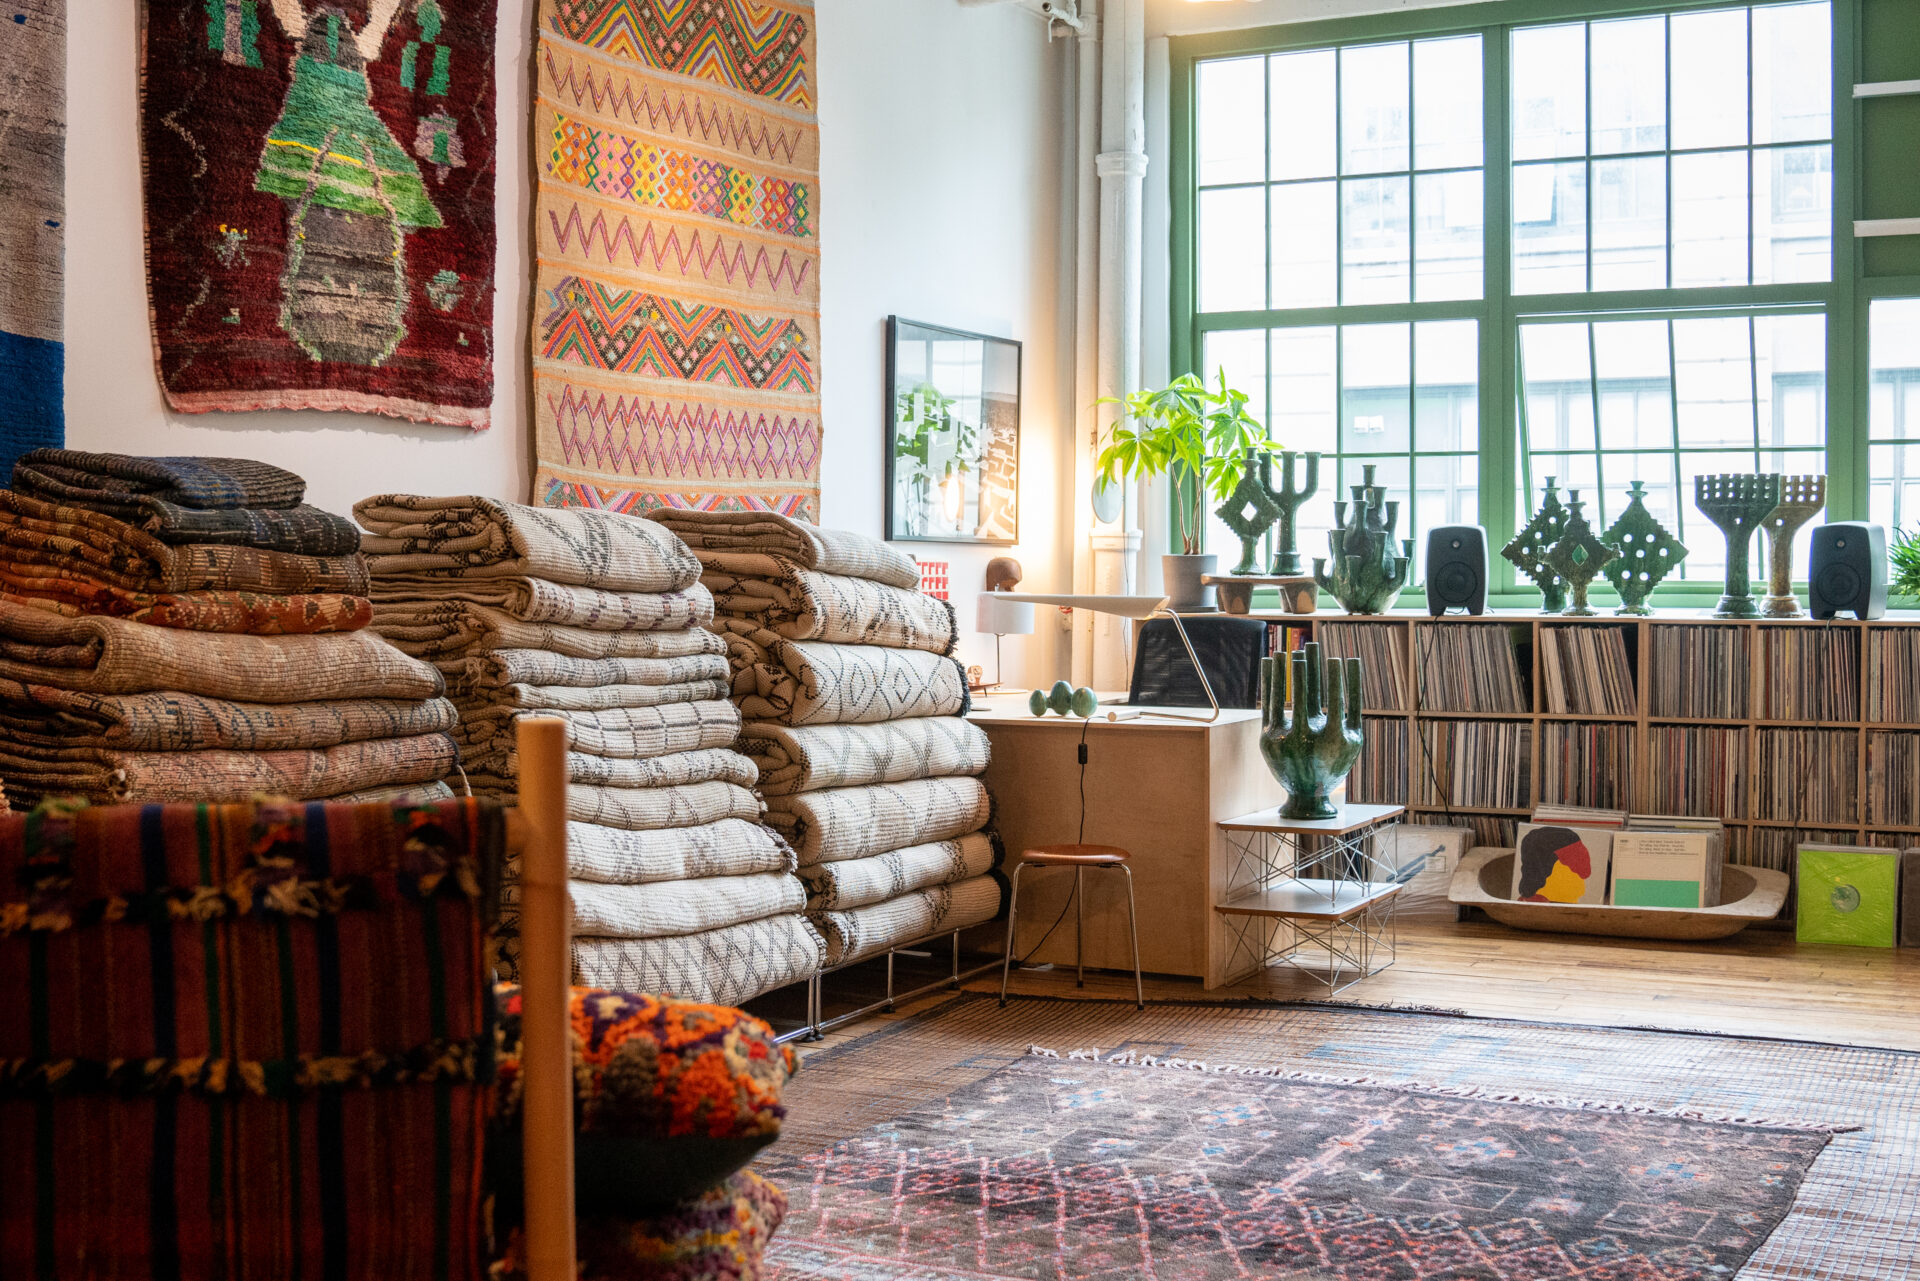 The interior of a store with many rugs lined up on the wall.